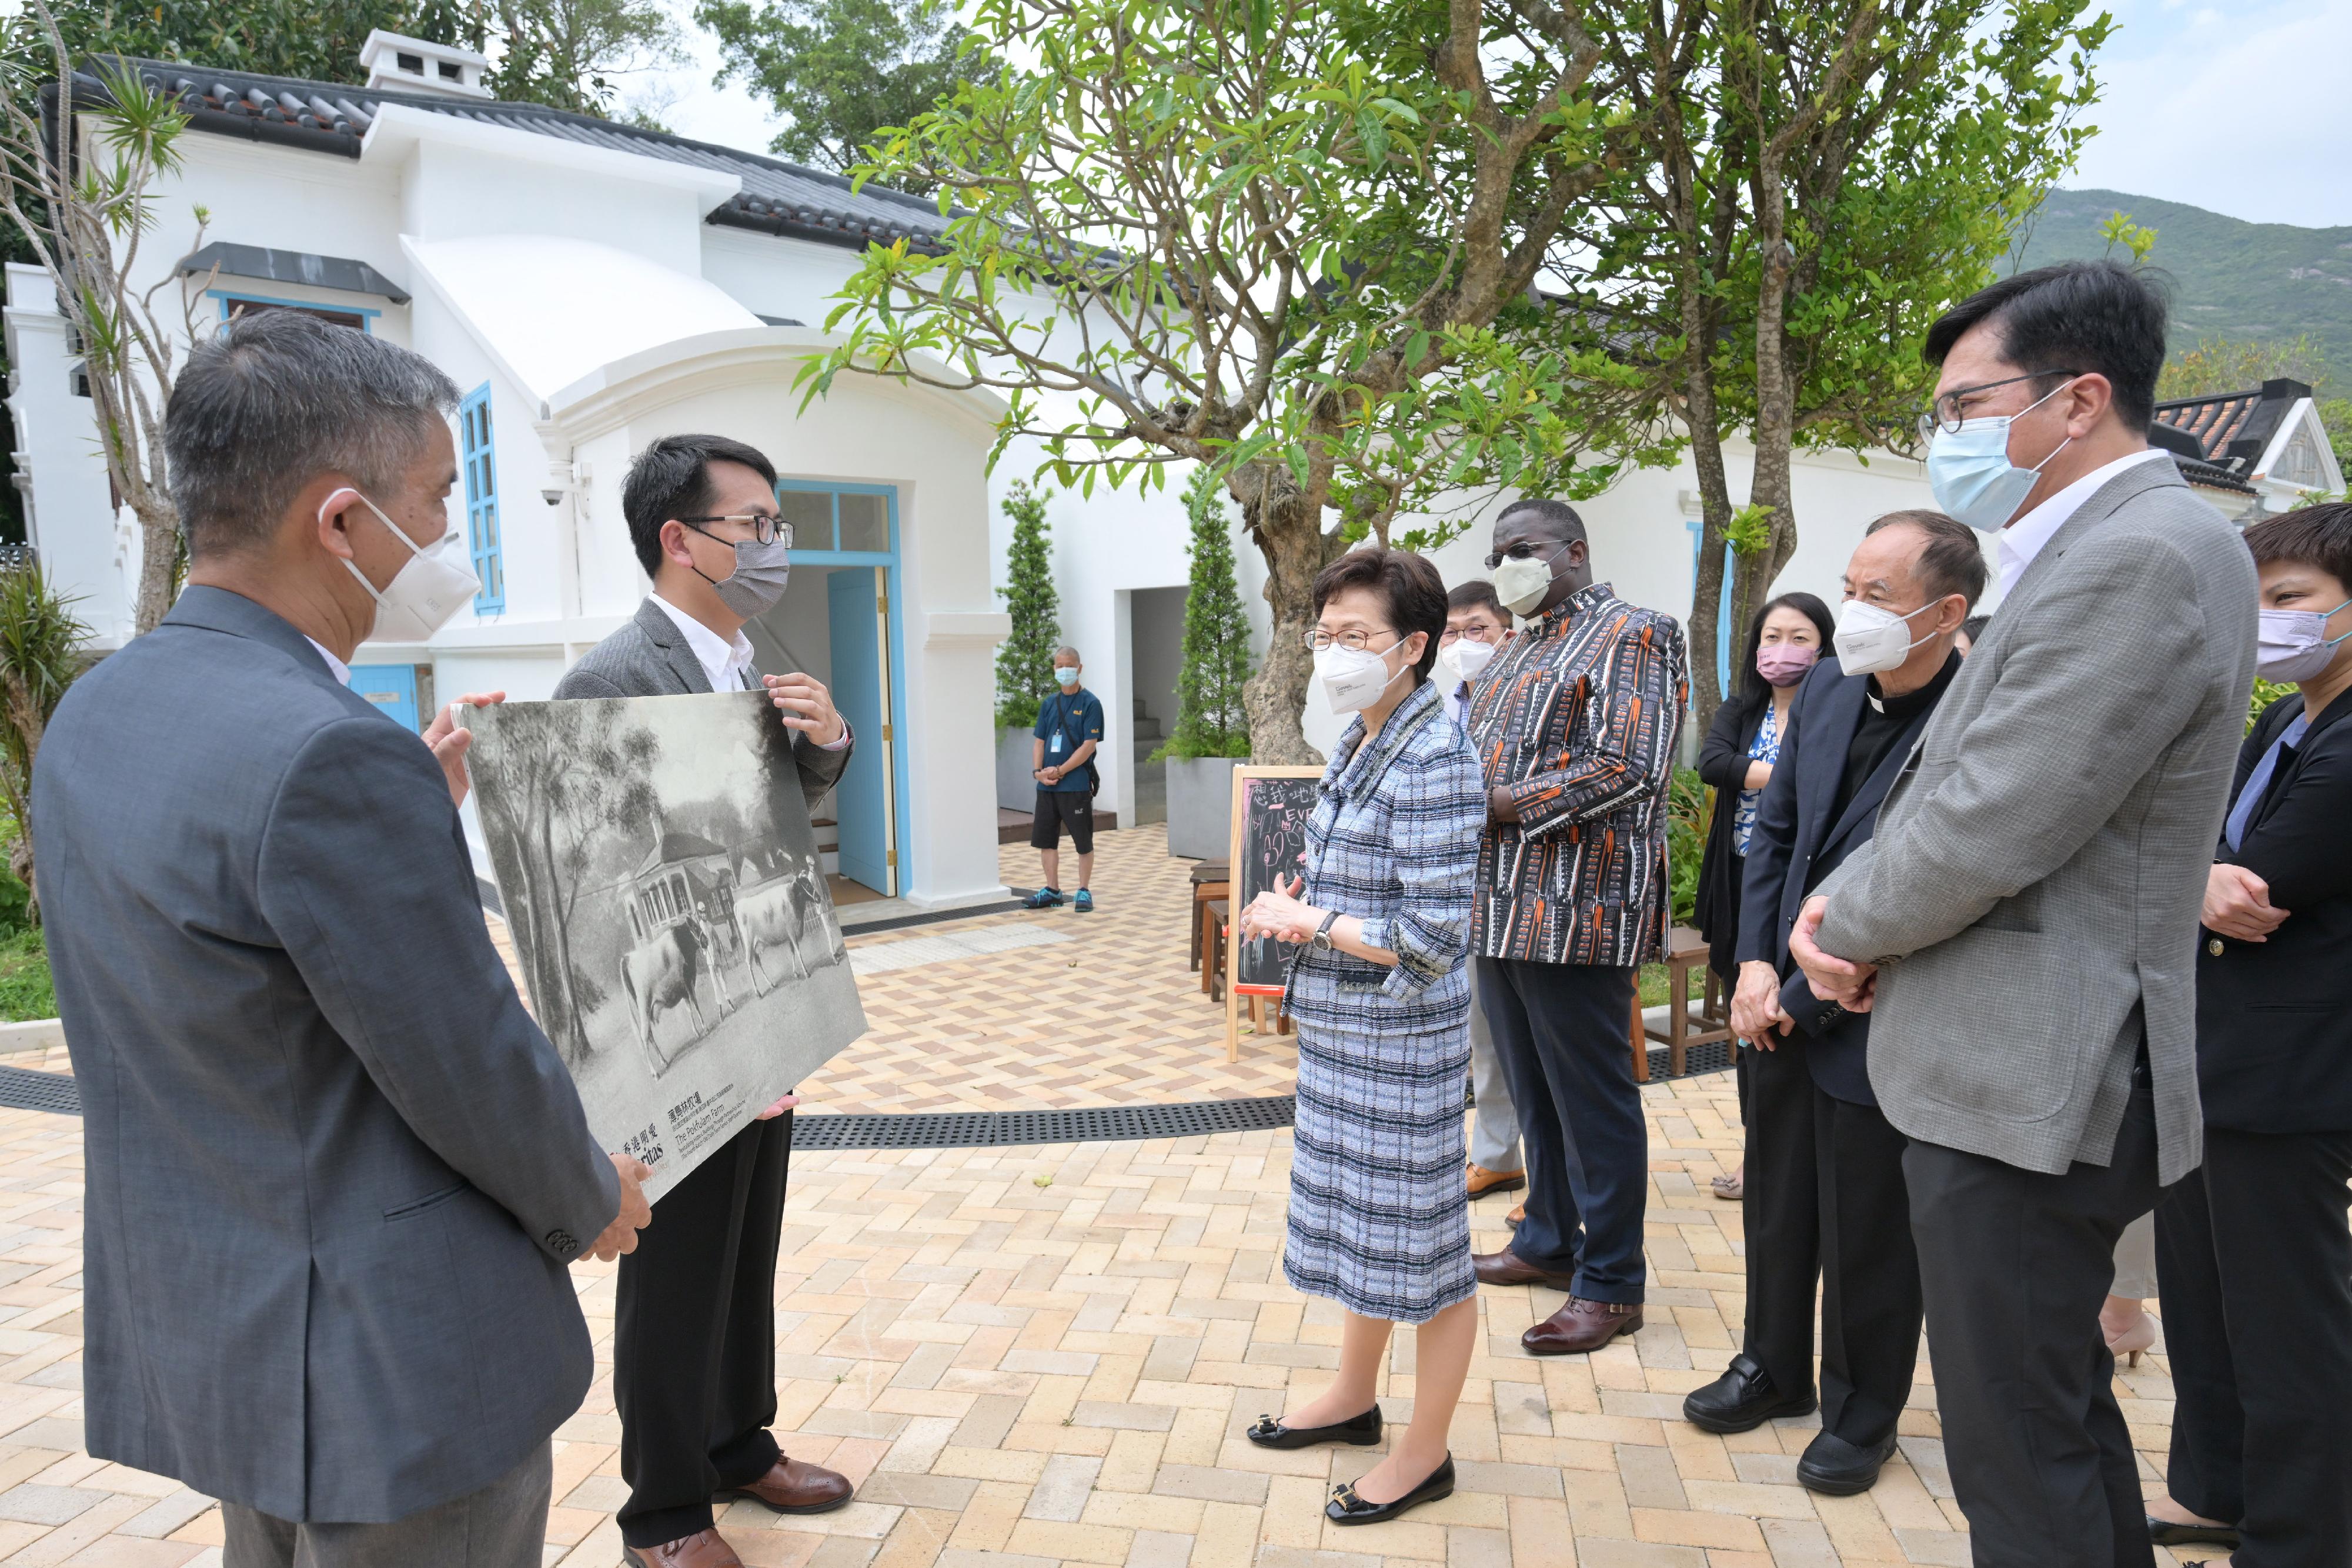 The Chief Executive, Mrs Carrie Lam (third left), today (April 22) visited The Pokfulam Farm to learn more about the revitalisation of the Old Dairy Farm Senior Staff Quarters in Pok Fu Lam under Batch IV of the Revitalising Historic Buildings Through Partnership Scheme. Looking on are the Secretary for Development, Mr Michael Wong (second right), and the Chief Executive of Caritas-Hong Kong, the Reverend Joseph T L Yim (third right).

